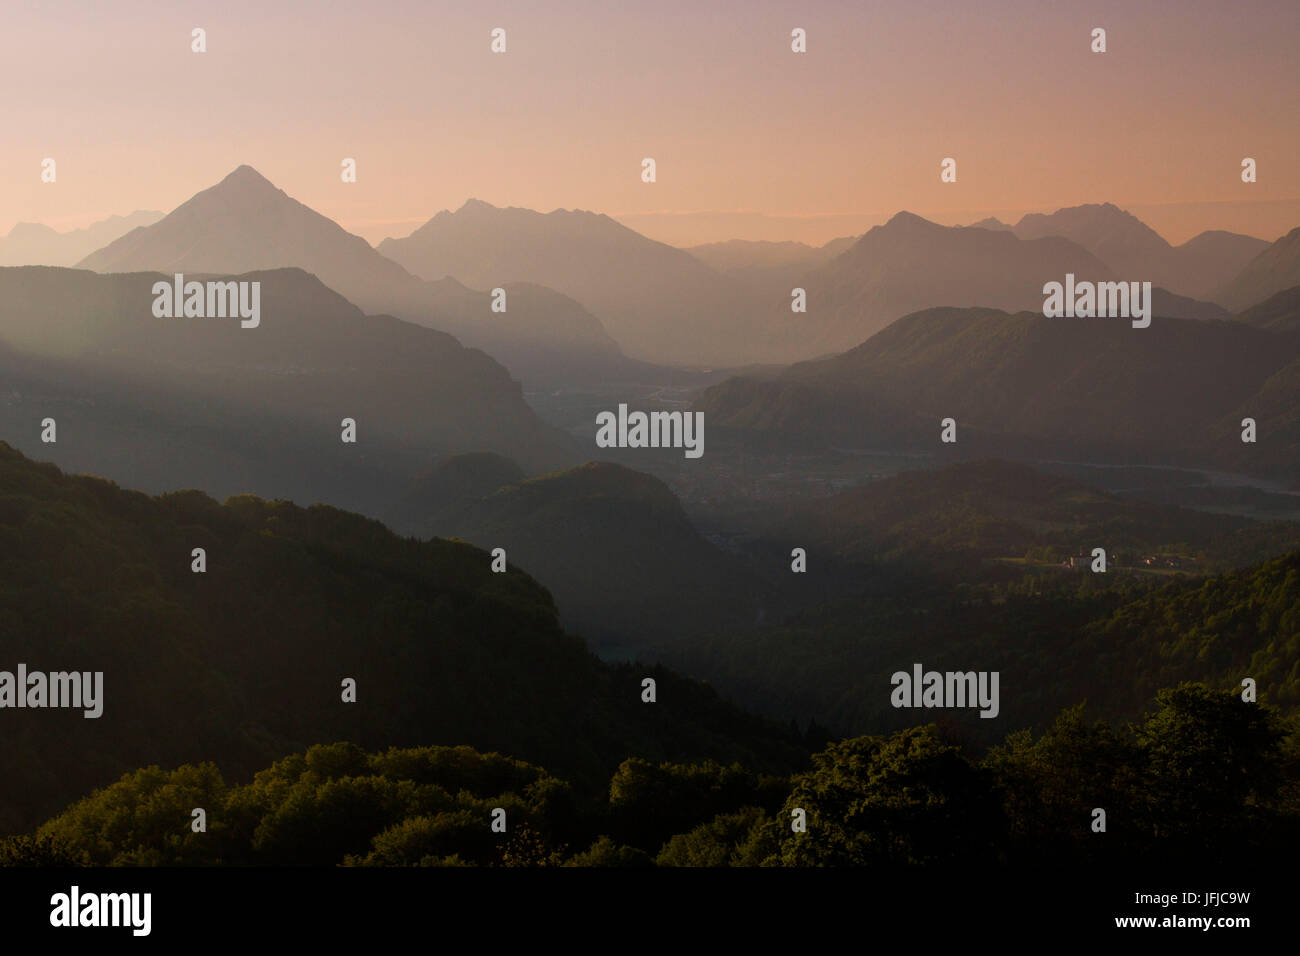 Europe, Italy, Friuli, Udine, The mountains of Carnia with their profiles seen from the plateau of Pani at dawn Stock Photo